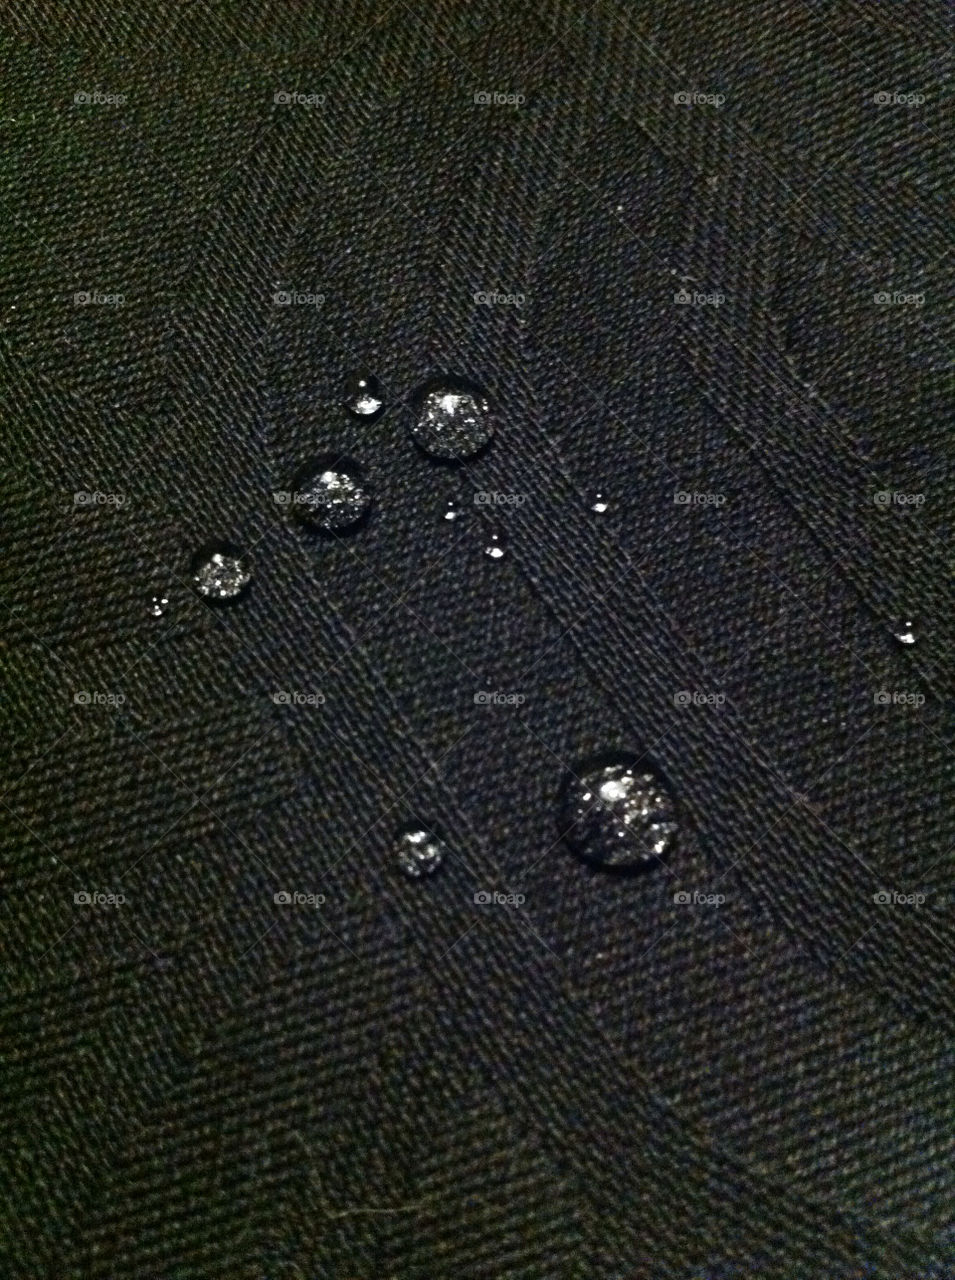 black water drops fabric by theabergnielsen